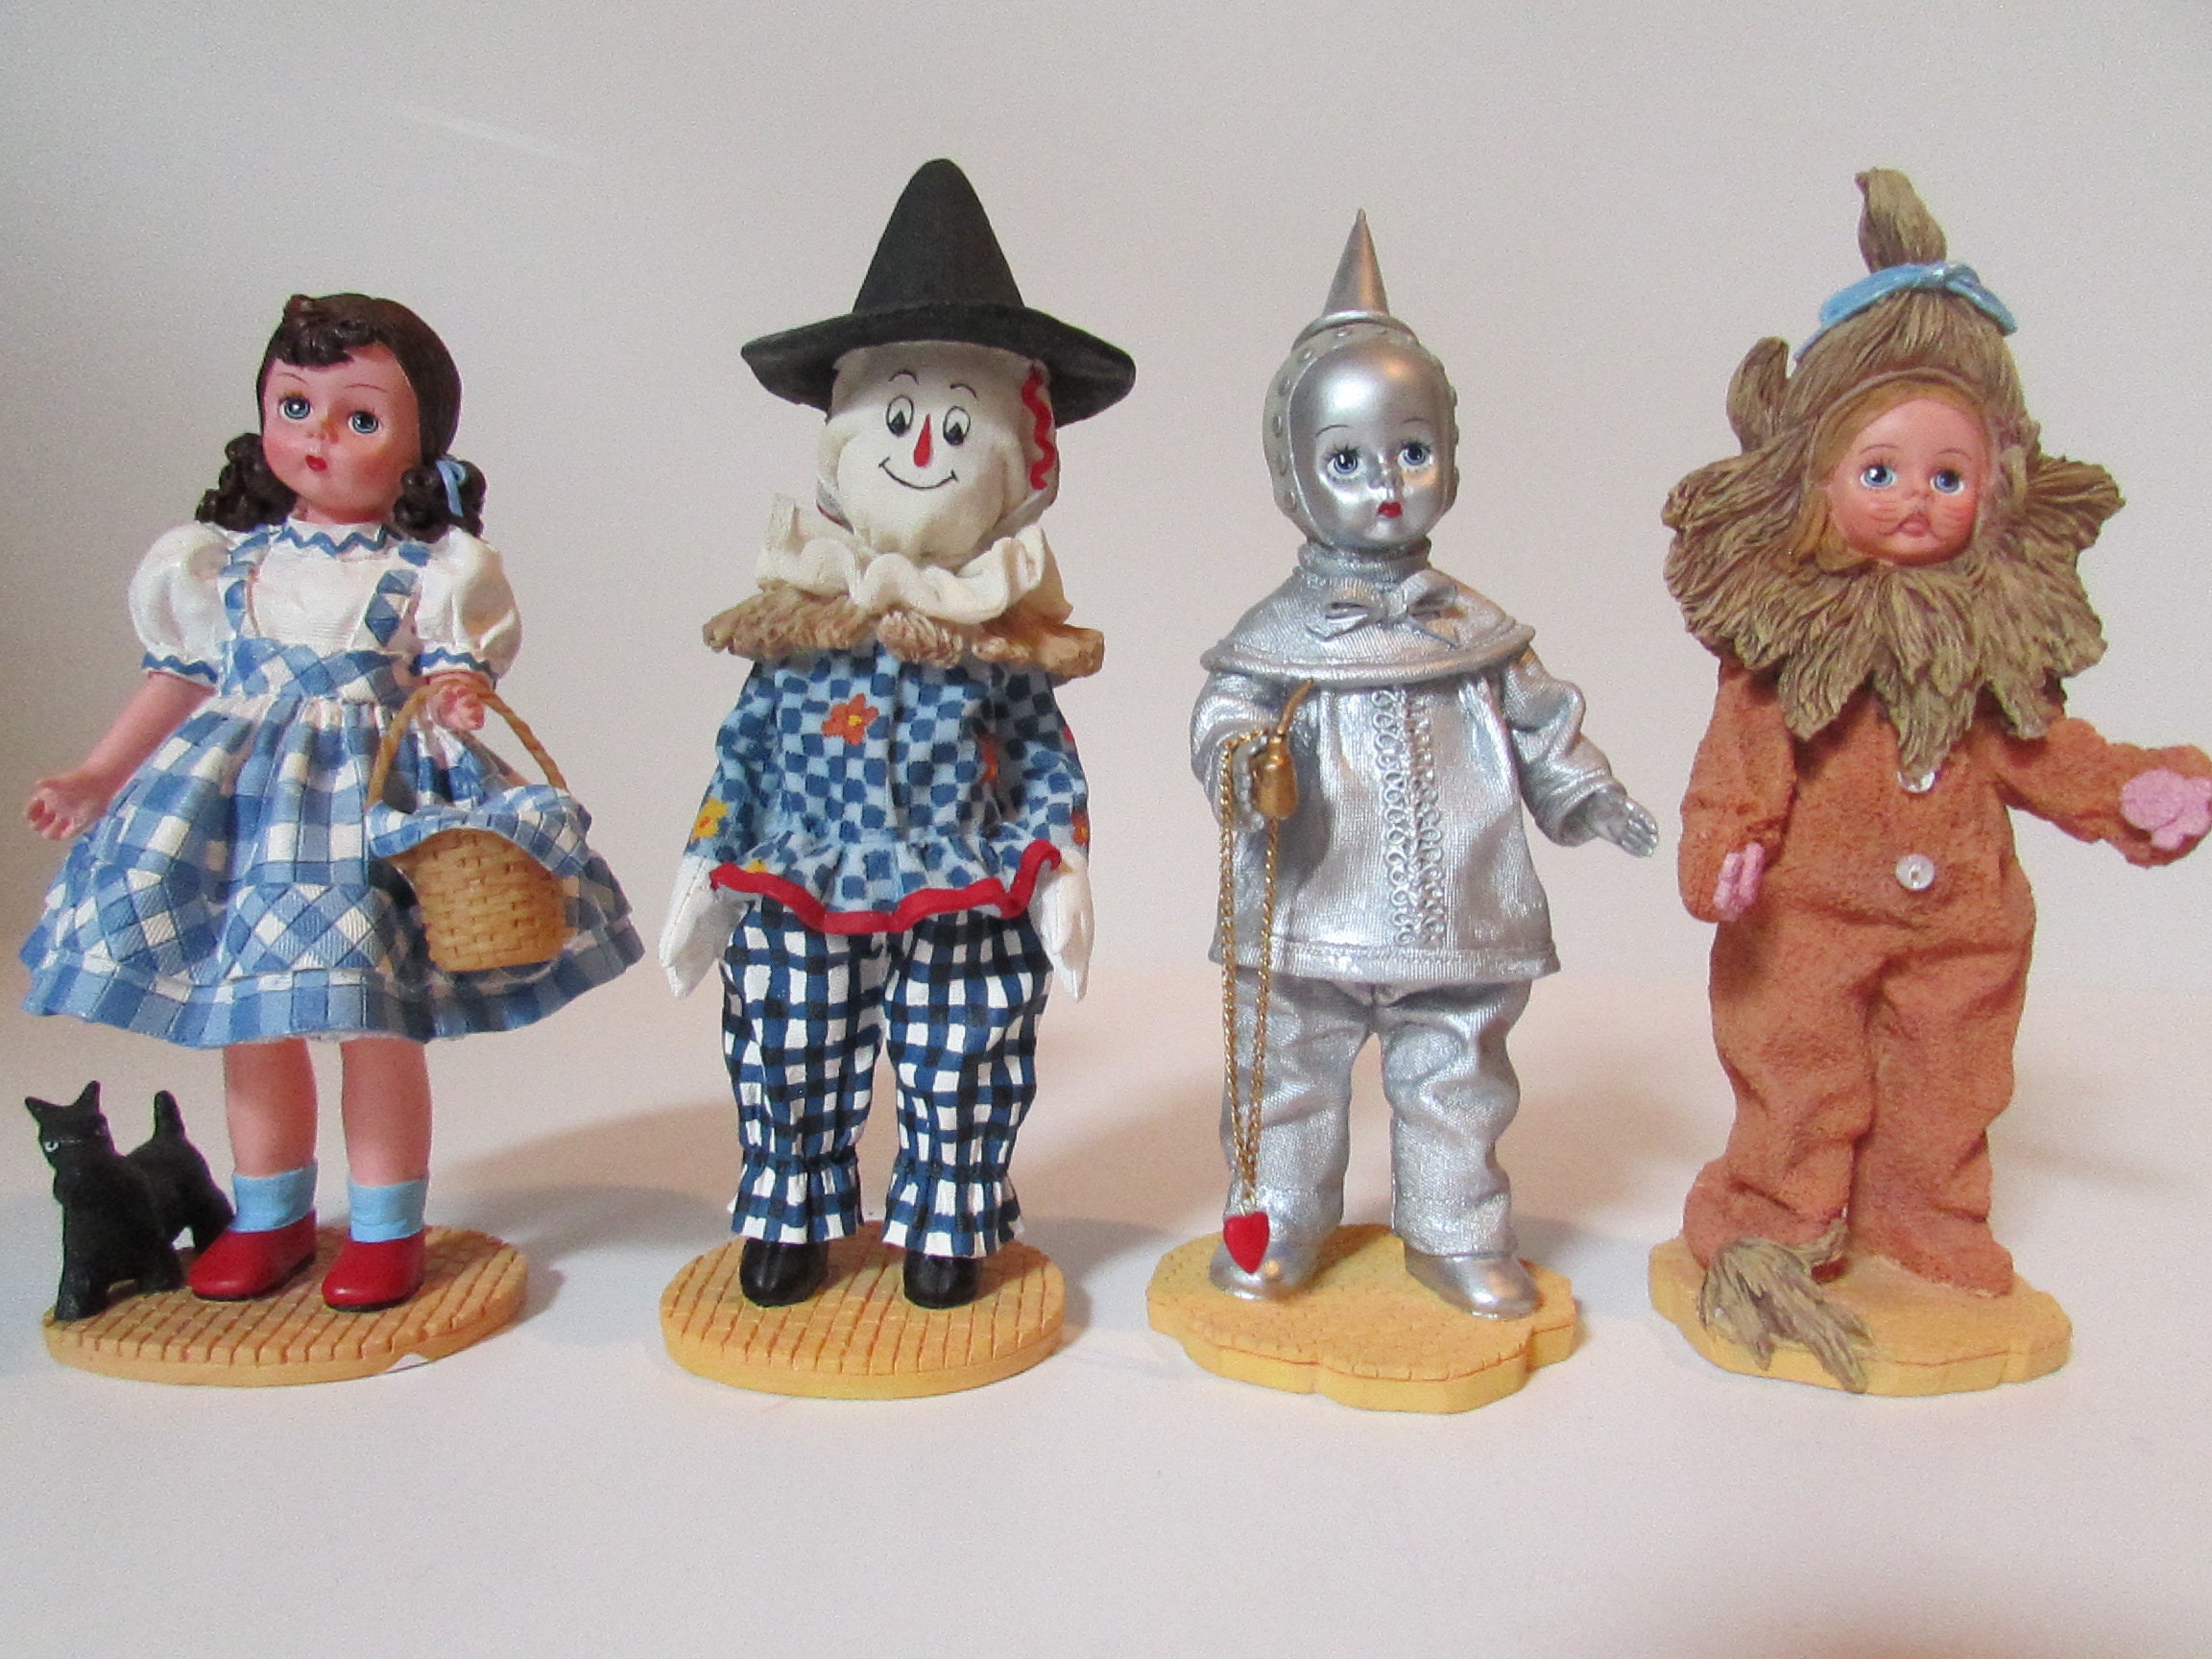 Wizard of Oz, Madame Alexander Figurines set of 4 Featuring